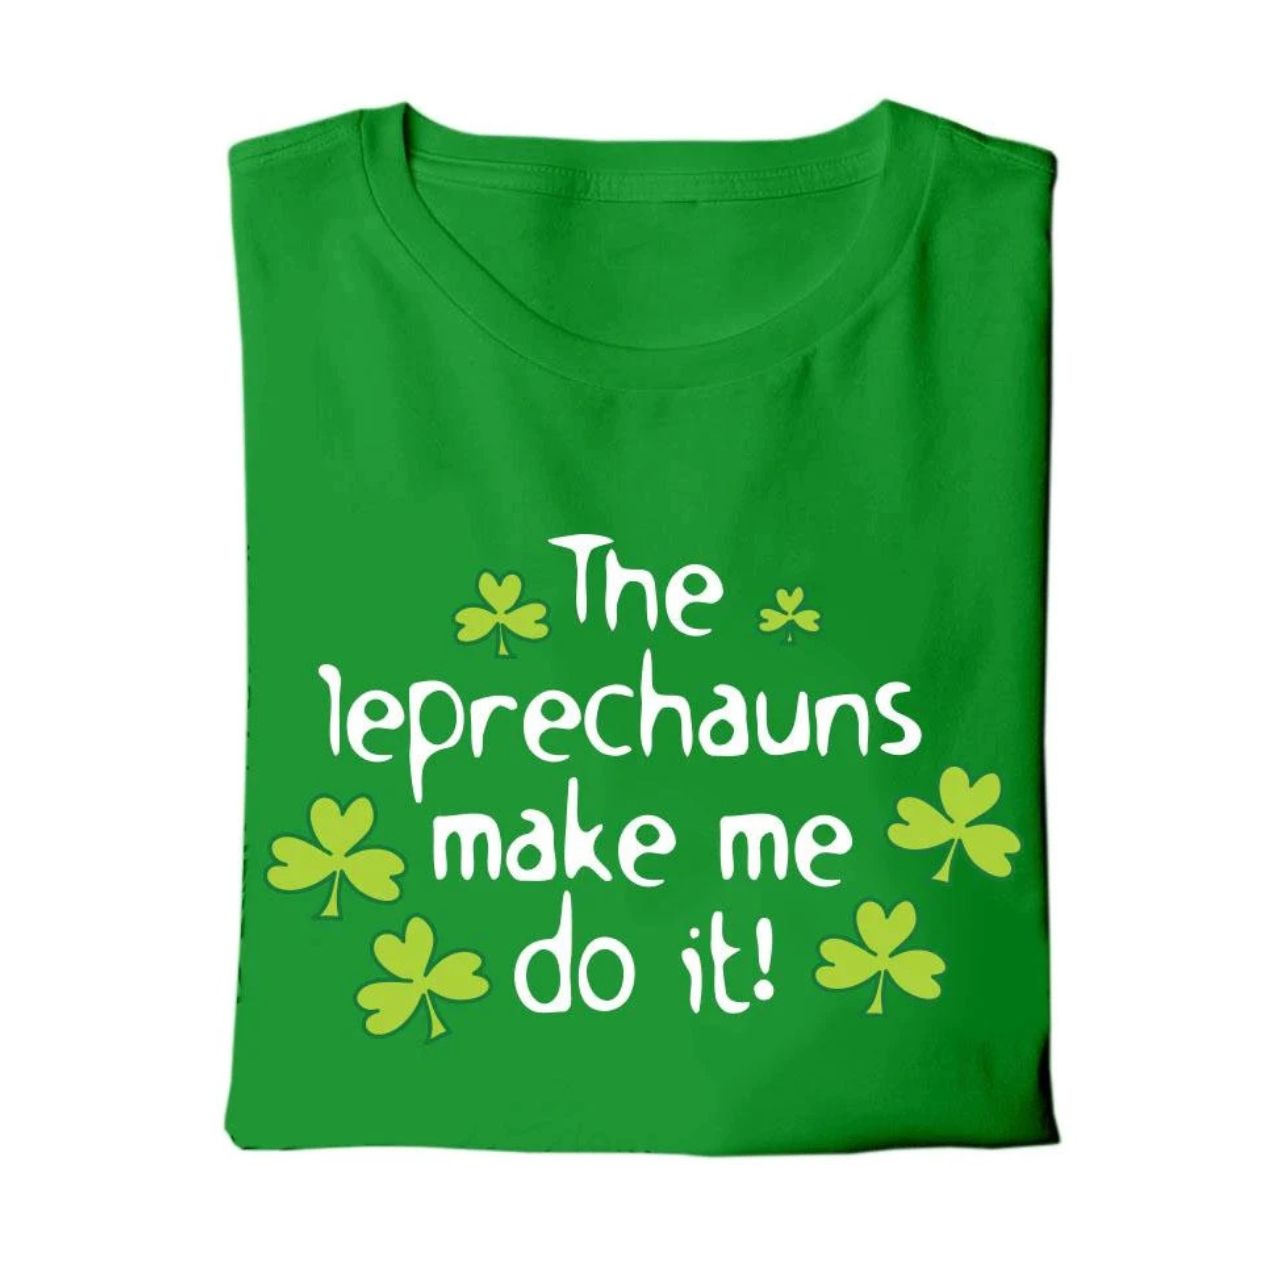 Leprechauns Made Me Do It Kids Green T-shirt  - 100% cotton* - Ash 99% cotton,1% polyester - Heather Grey 97% cotton, 3% polyester - Crew Neck - Designed And Printed in Ireland By Cara craft - Machine Washable